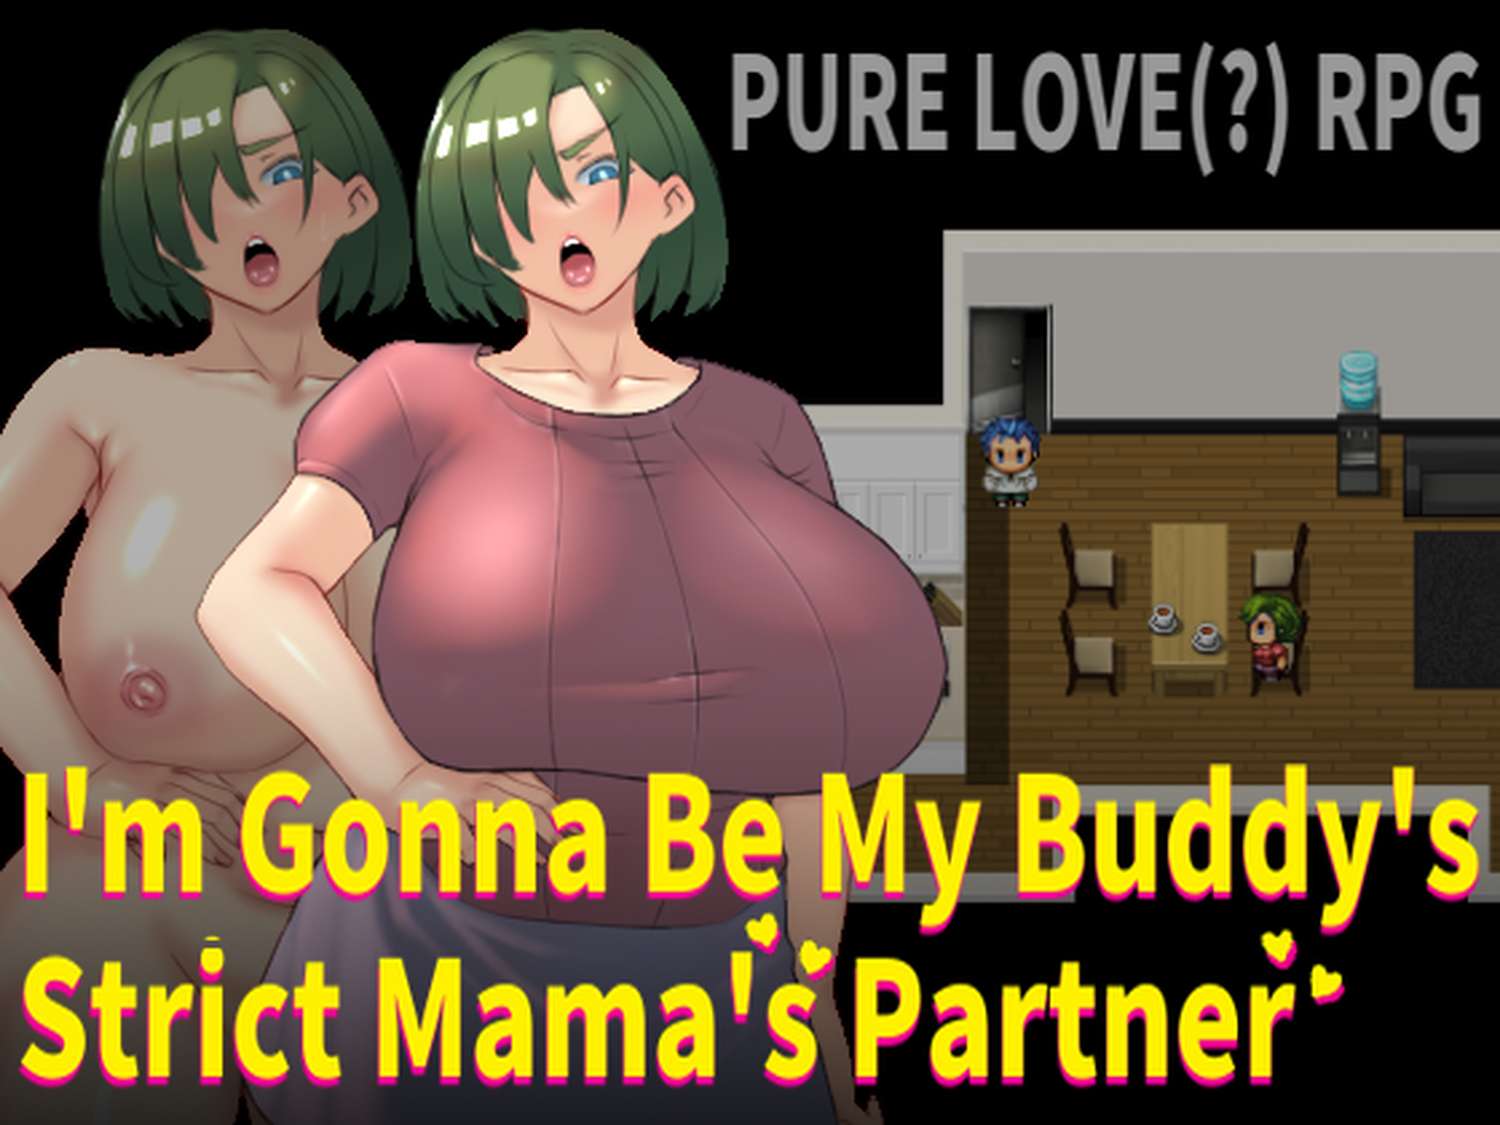 I'm Goona Be My Buddy's Strict Mama's Partner [Hoi Hoi Hoi] Adult xxx Game Download